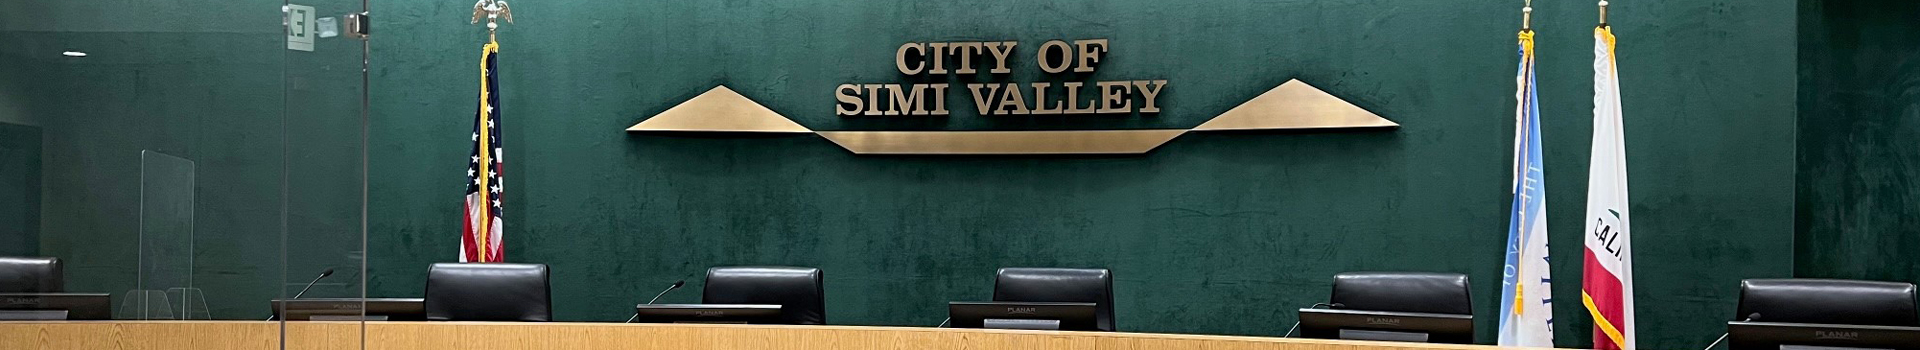 The City of Simi Valley City Council Chambers Dias flanked by U.S. Flag on the right and the City Flag and State of California Flag on the Left